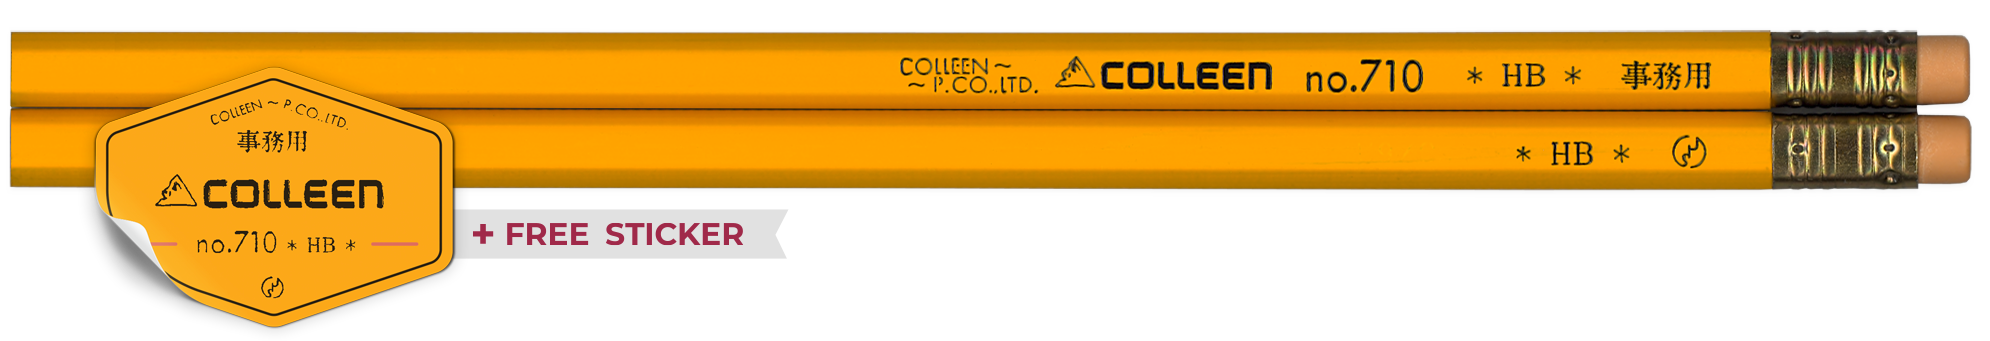 Colleen pencil with sticker